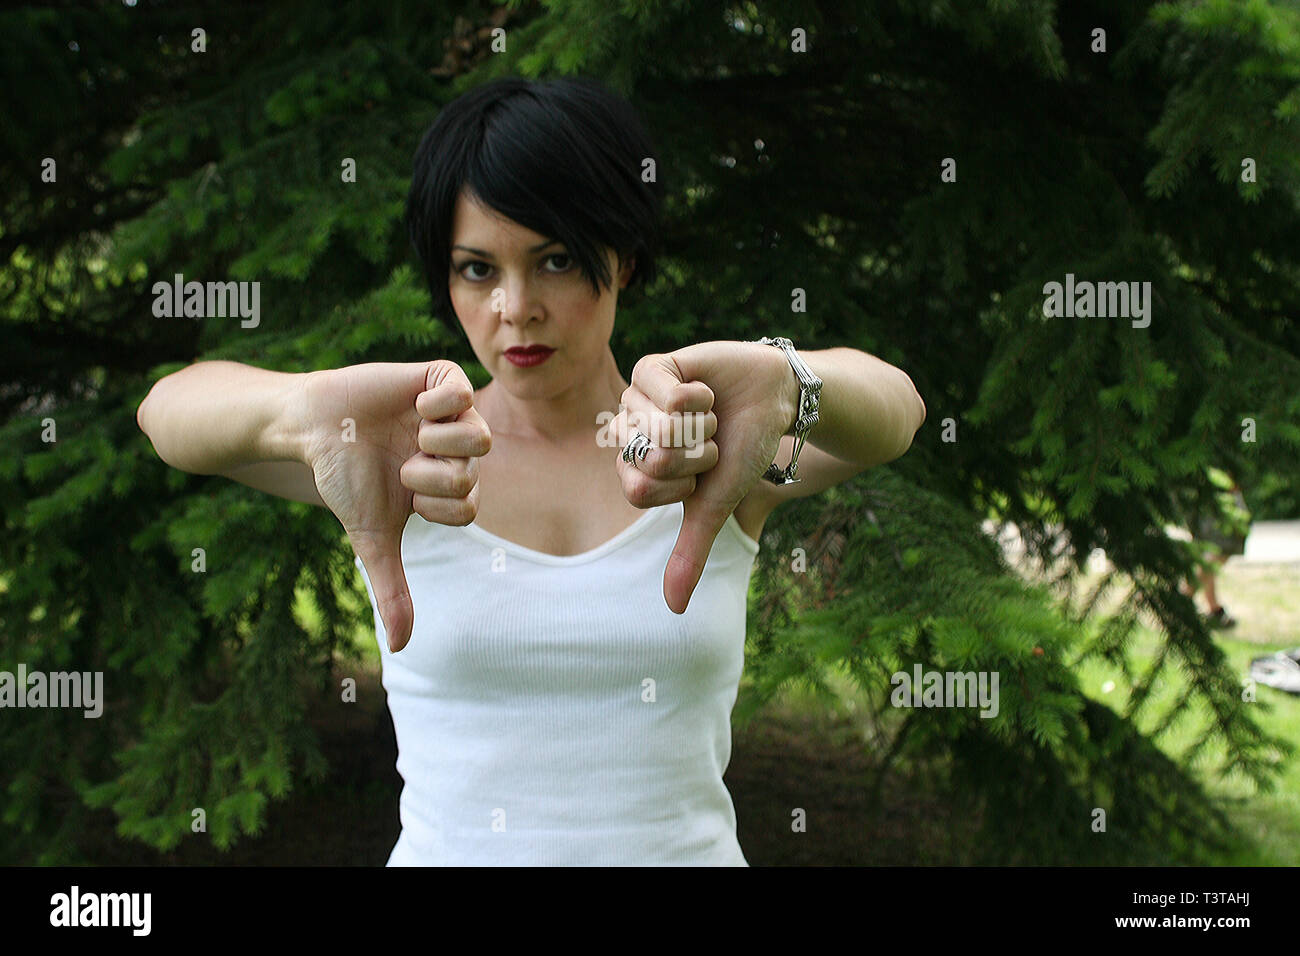 Beautiful dark haired lady with a white top making hand signals. Two thumbs down. Stock Photo